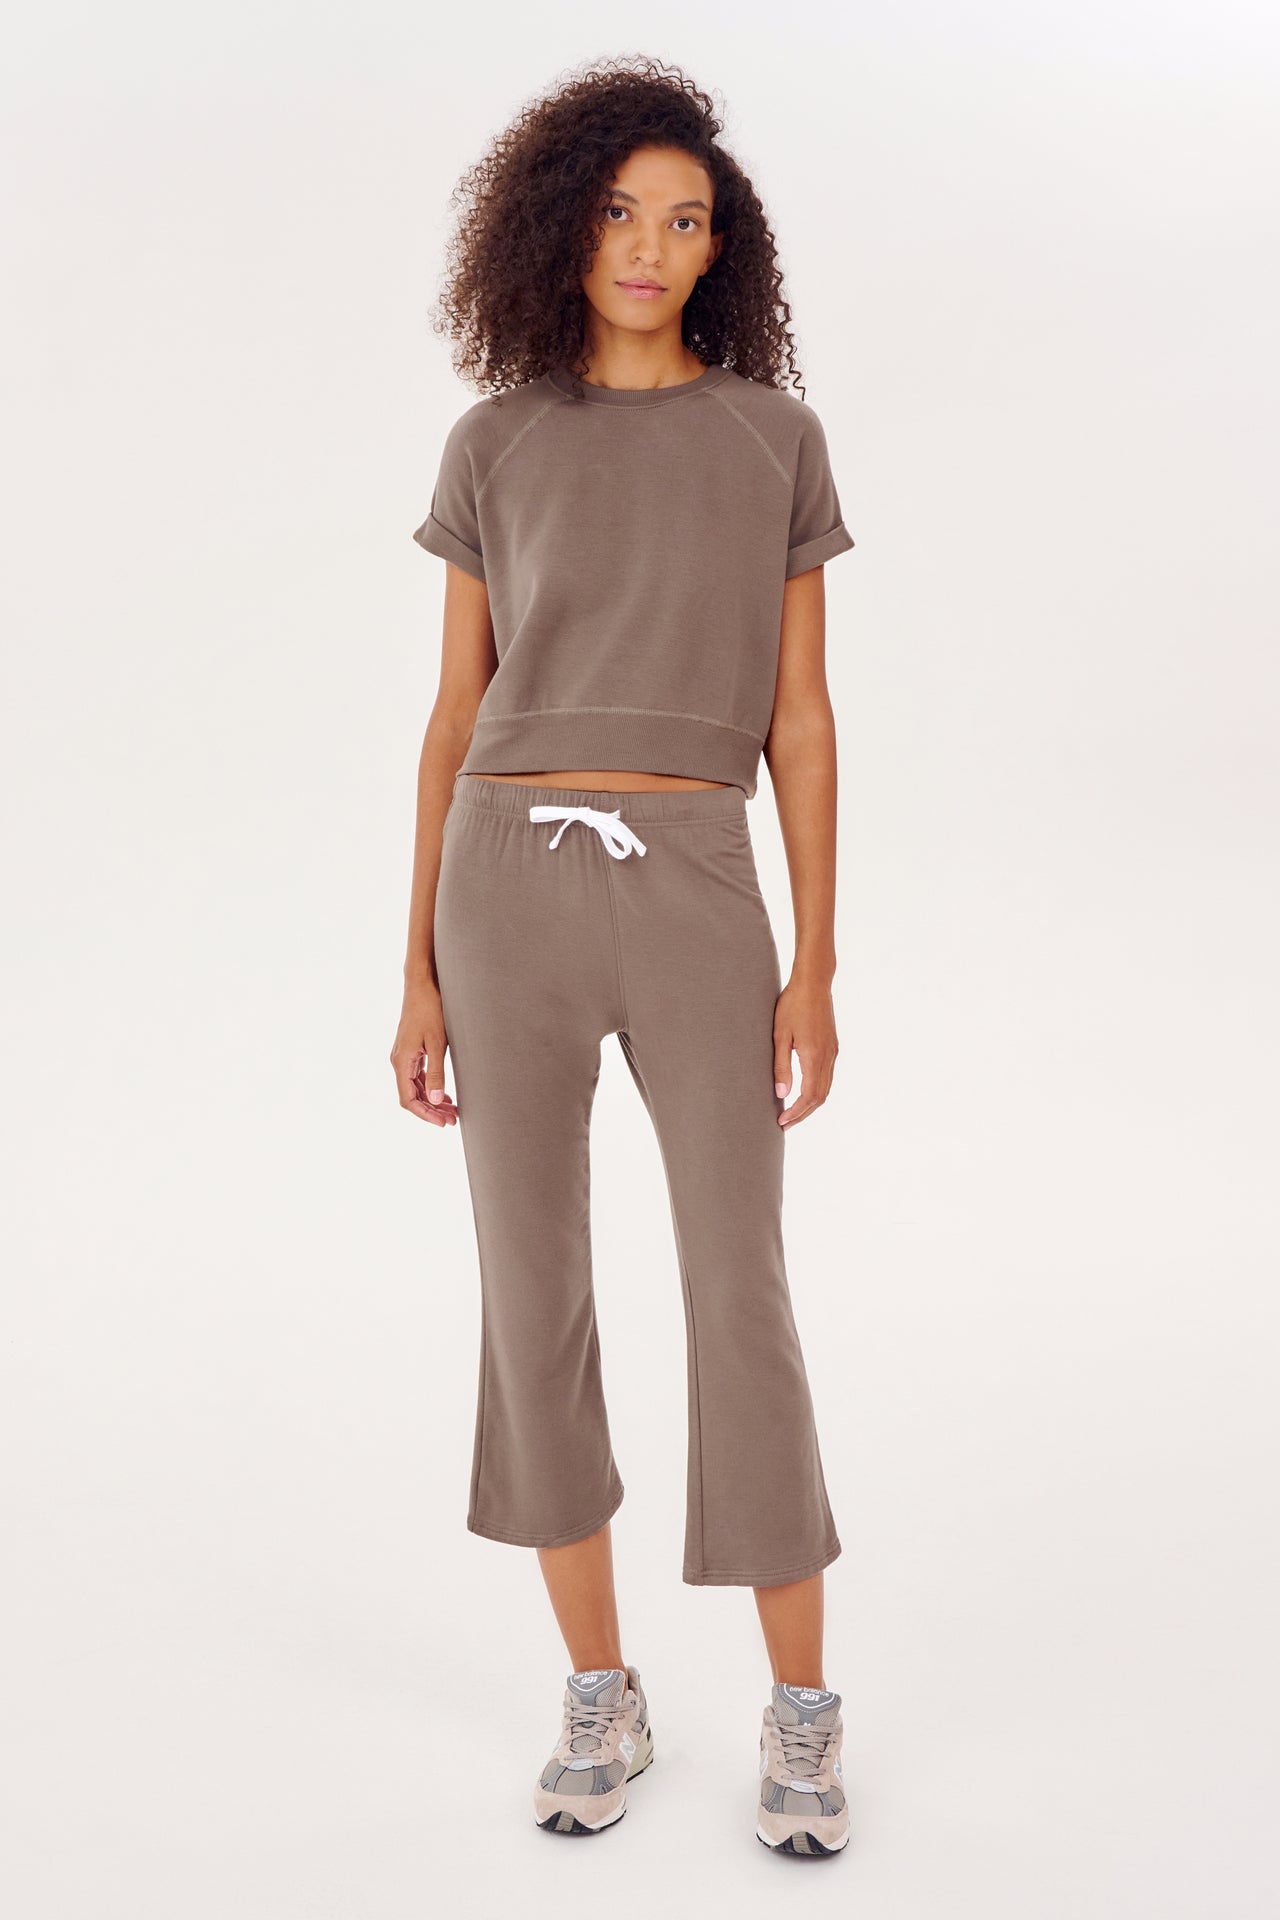 The model is wearing cozy SPLITS59 Lentil Brooks Fleece Cropped Flare sweatpants and a tan crop top.